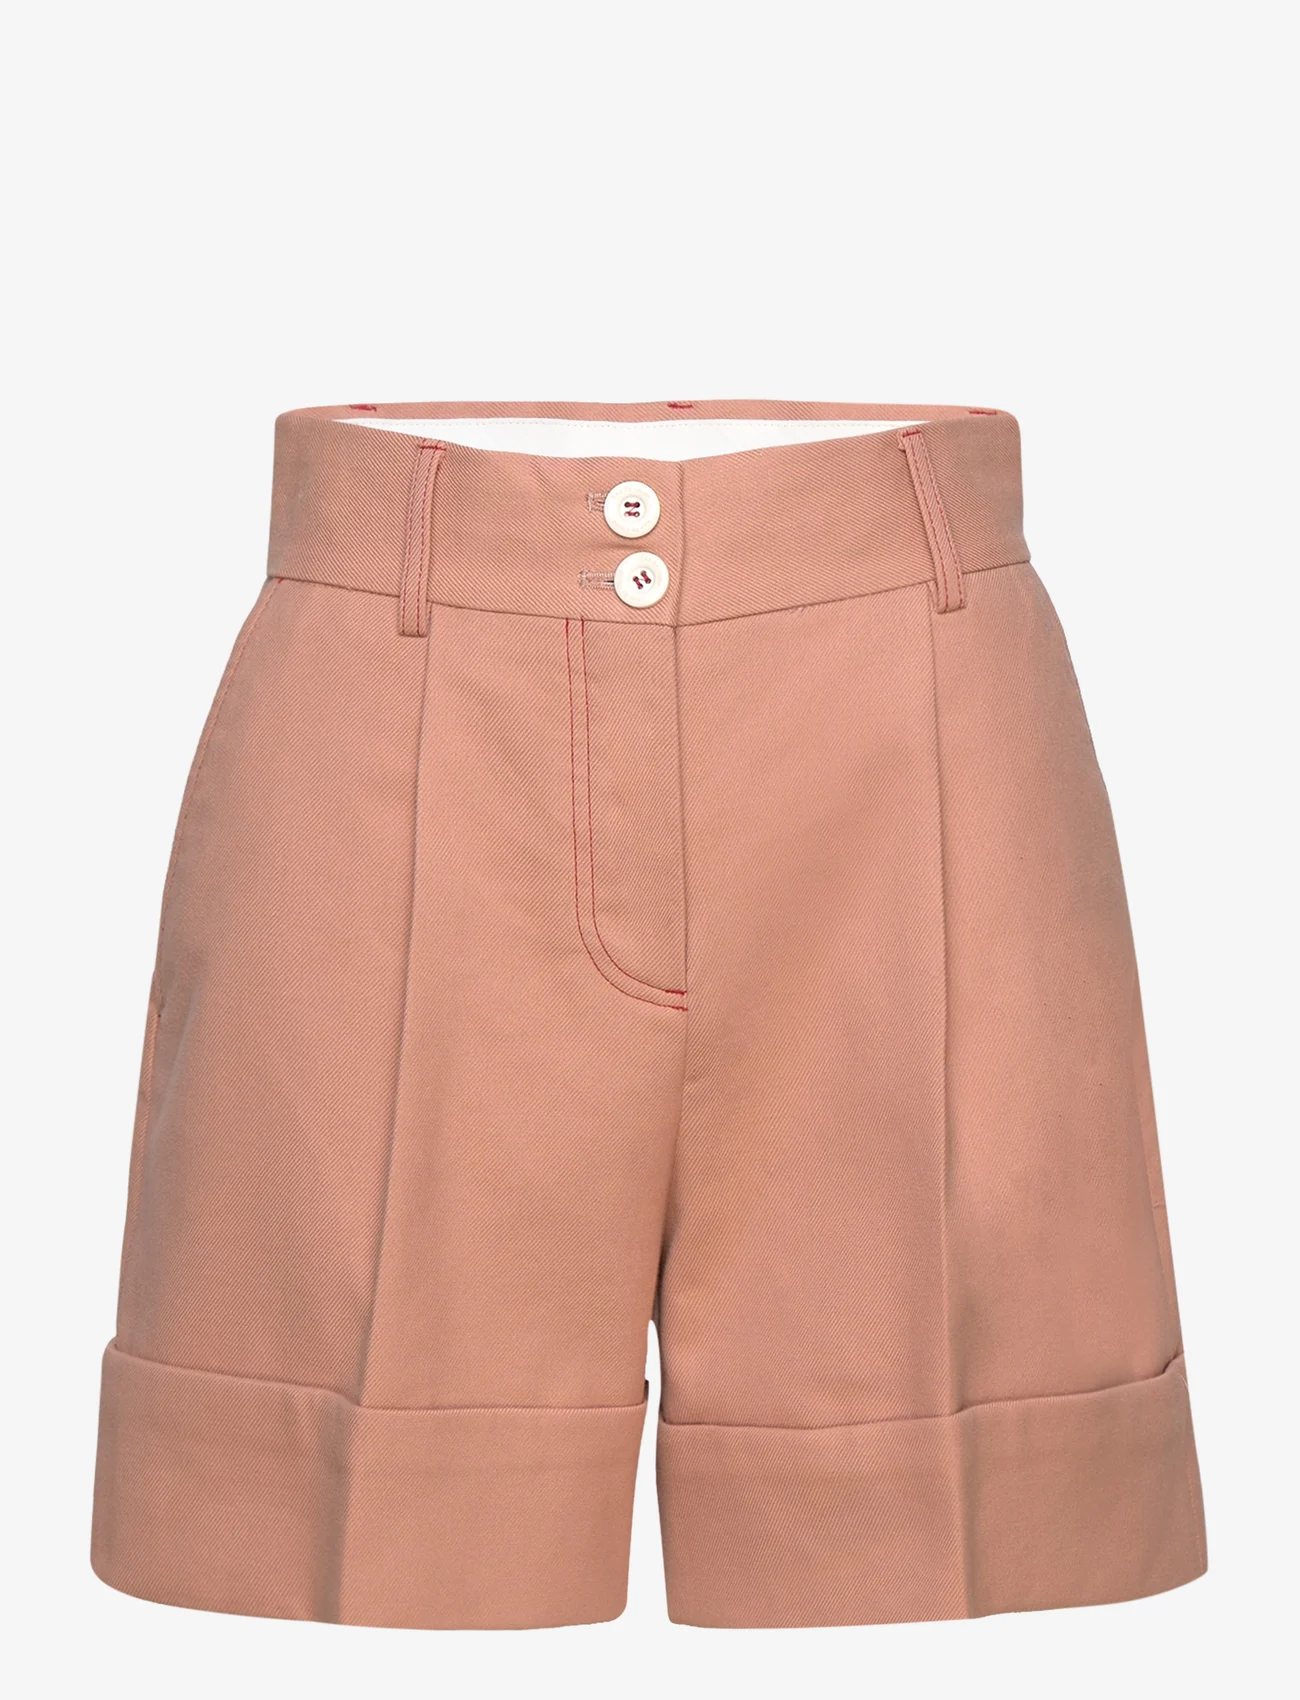 See by Chloé - Short - dusty coral - 0